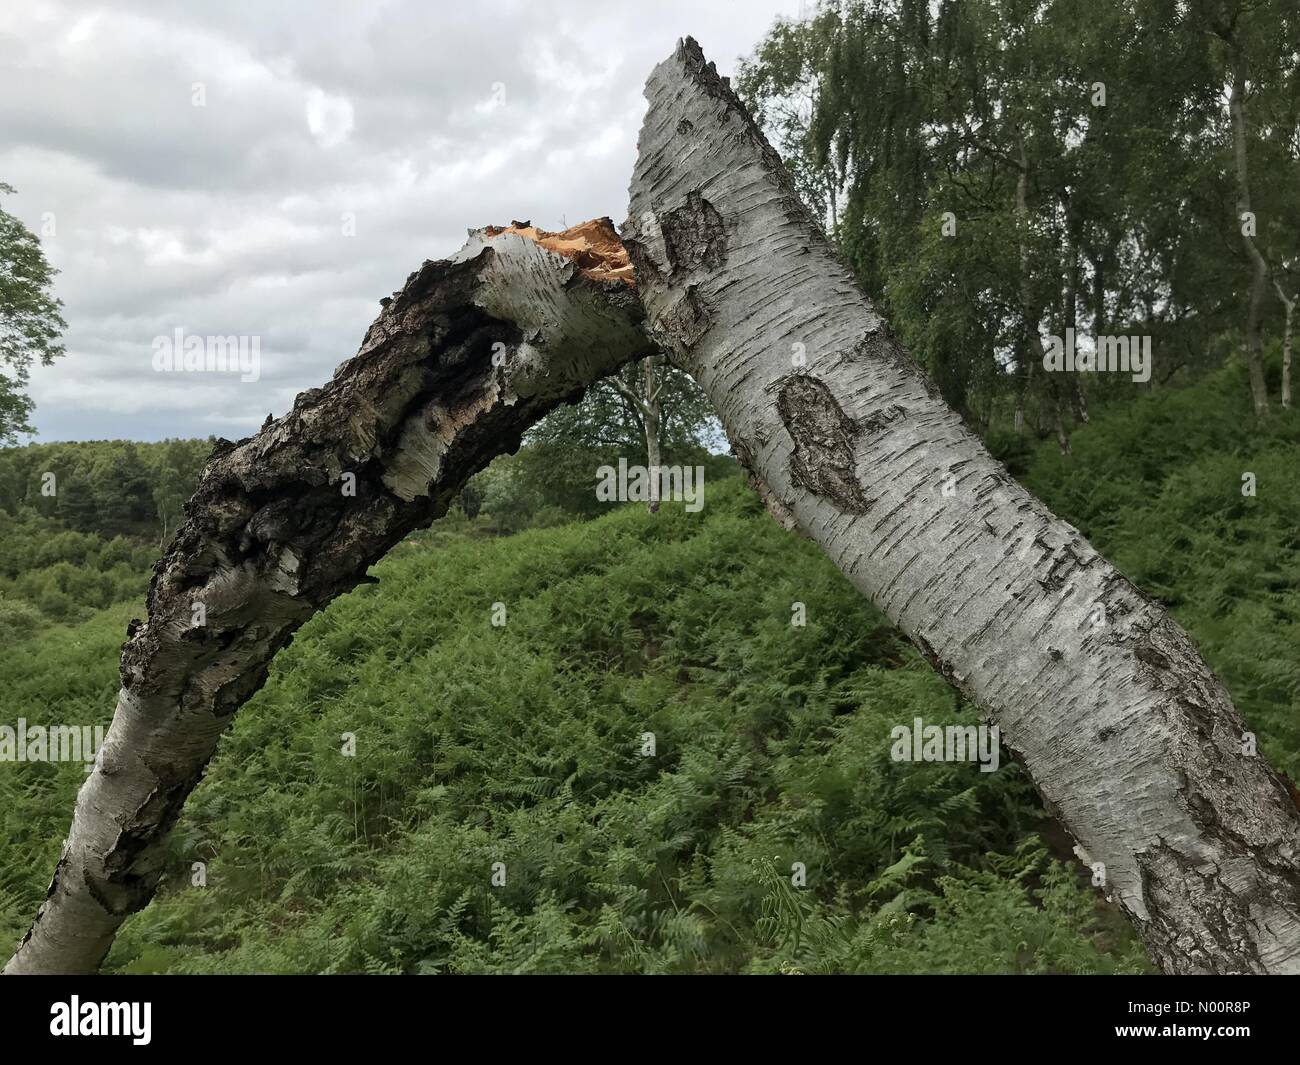 A recent spate of tree vandalism on Cannock Chase, Staffordshire. Tree has been snapped. Damage occurred Friday 15th June Stock Photo